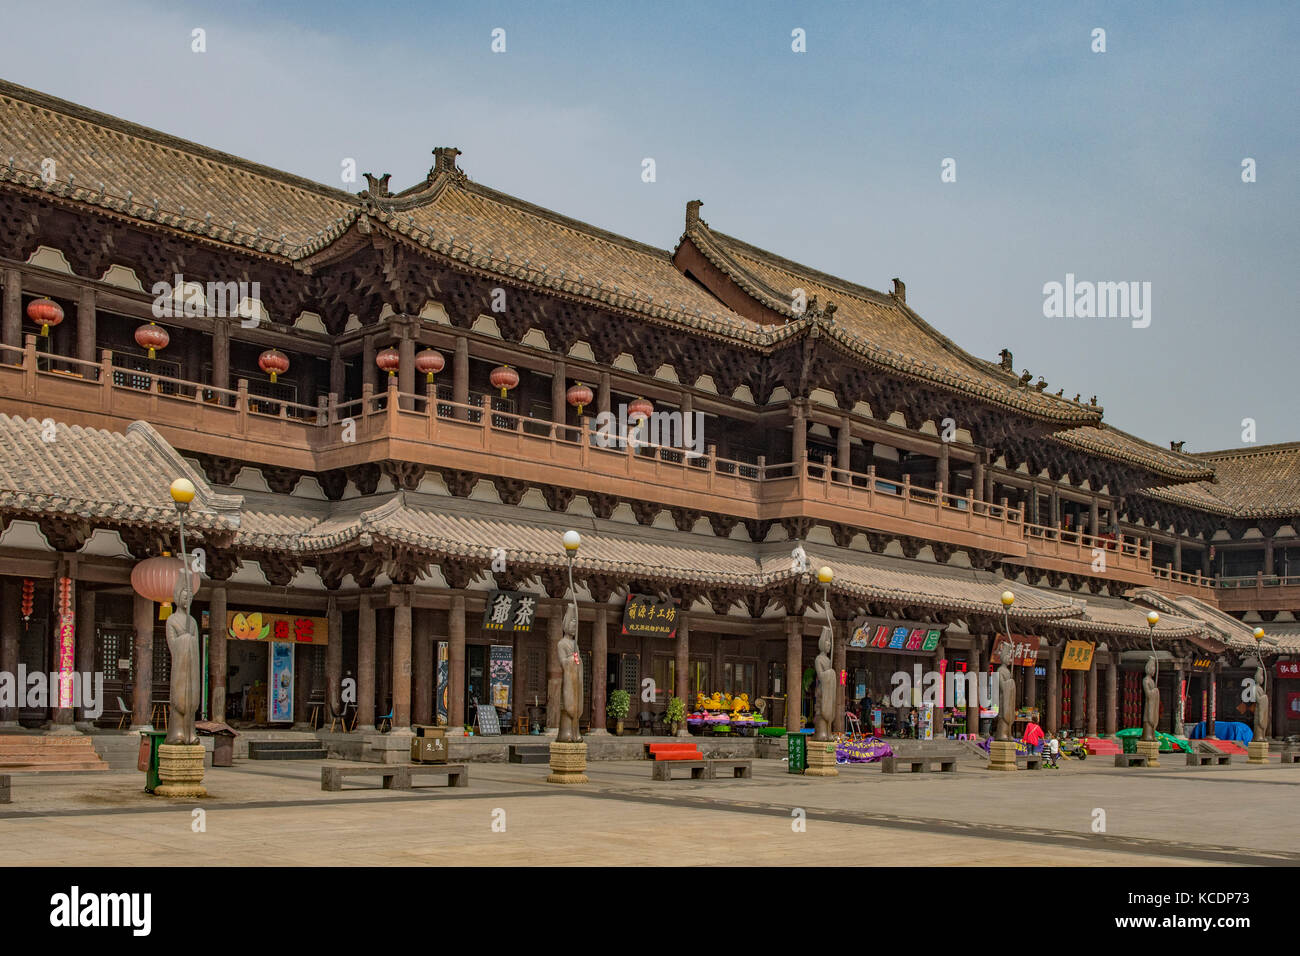 Ming-qing street, Datong, Shanxi, Chine Banque D'Images